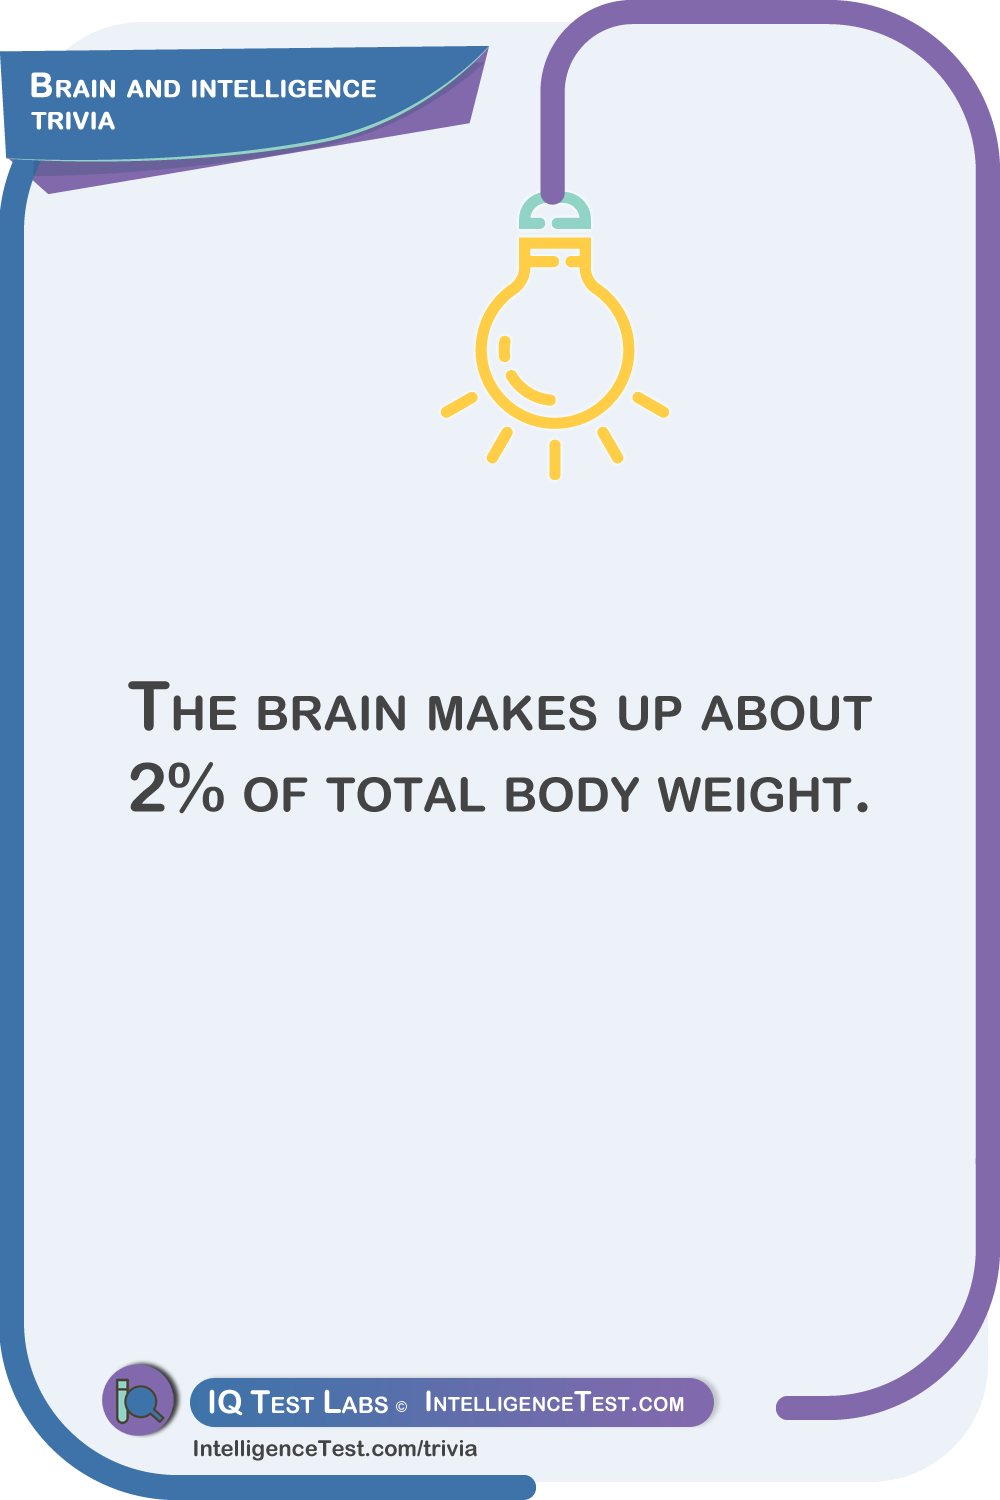 The brain makes up about 2% of total body weight.